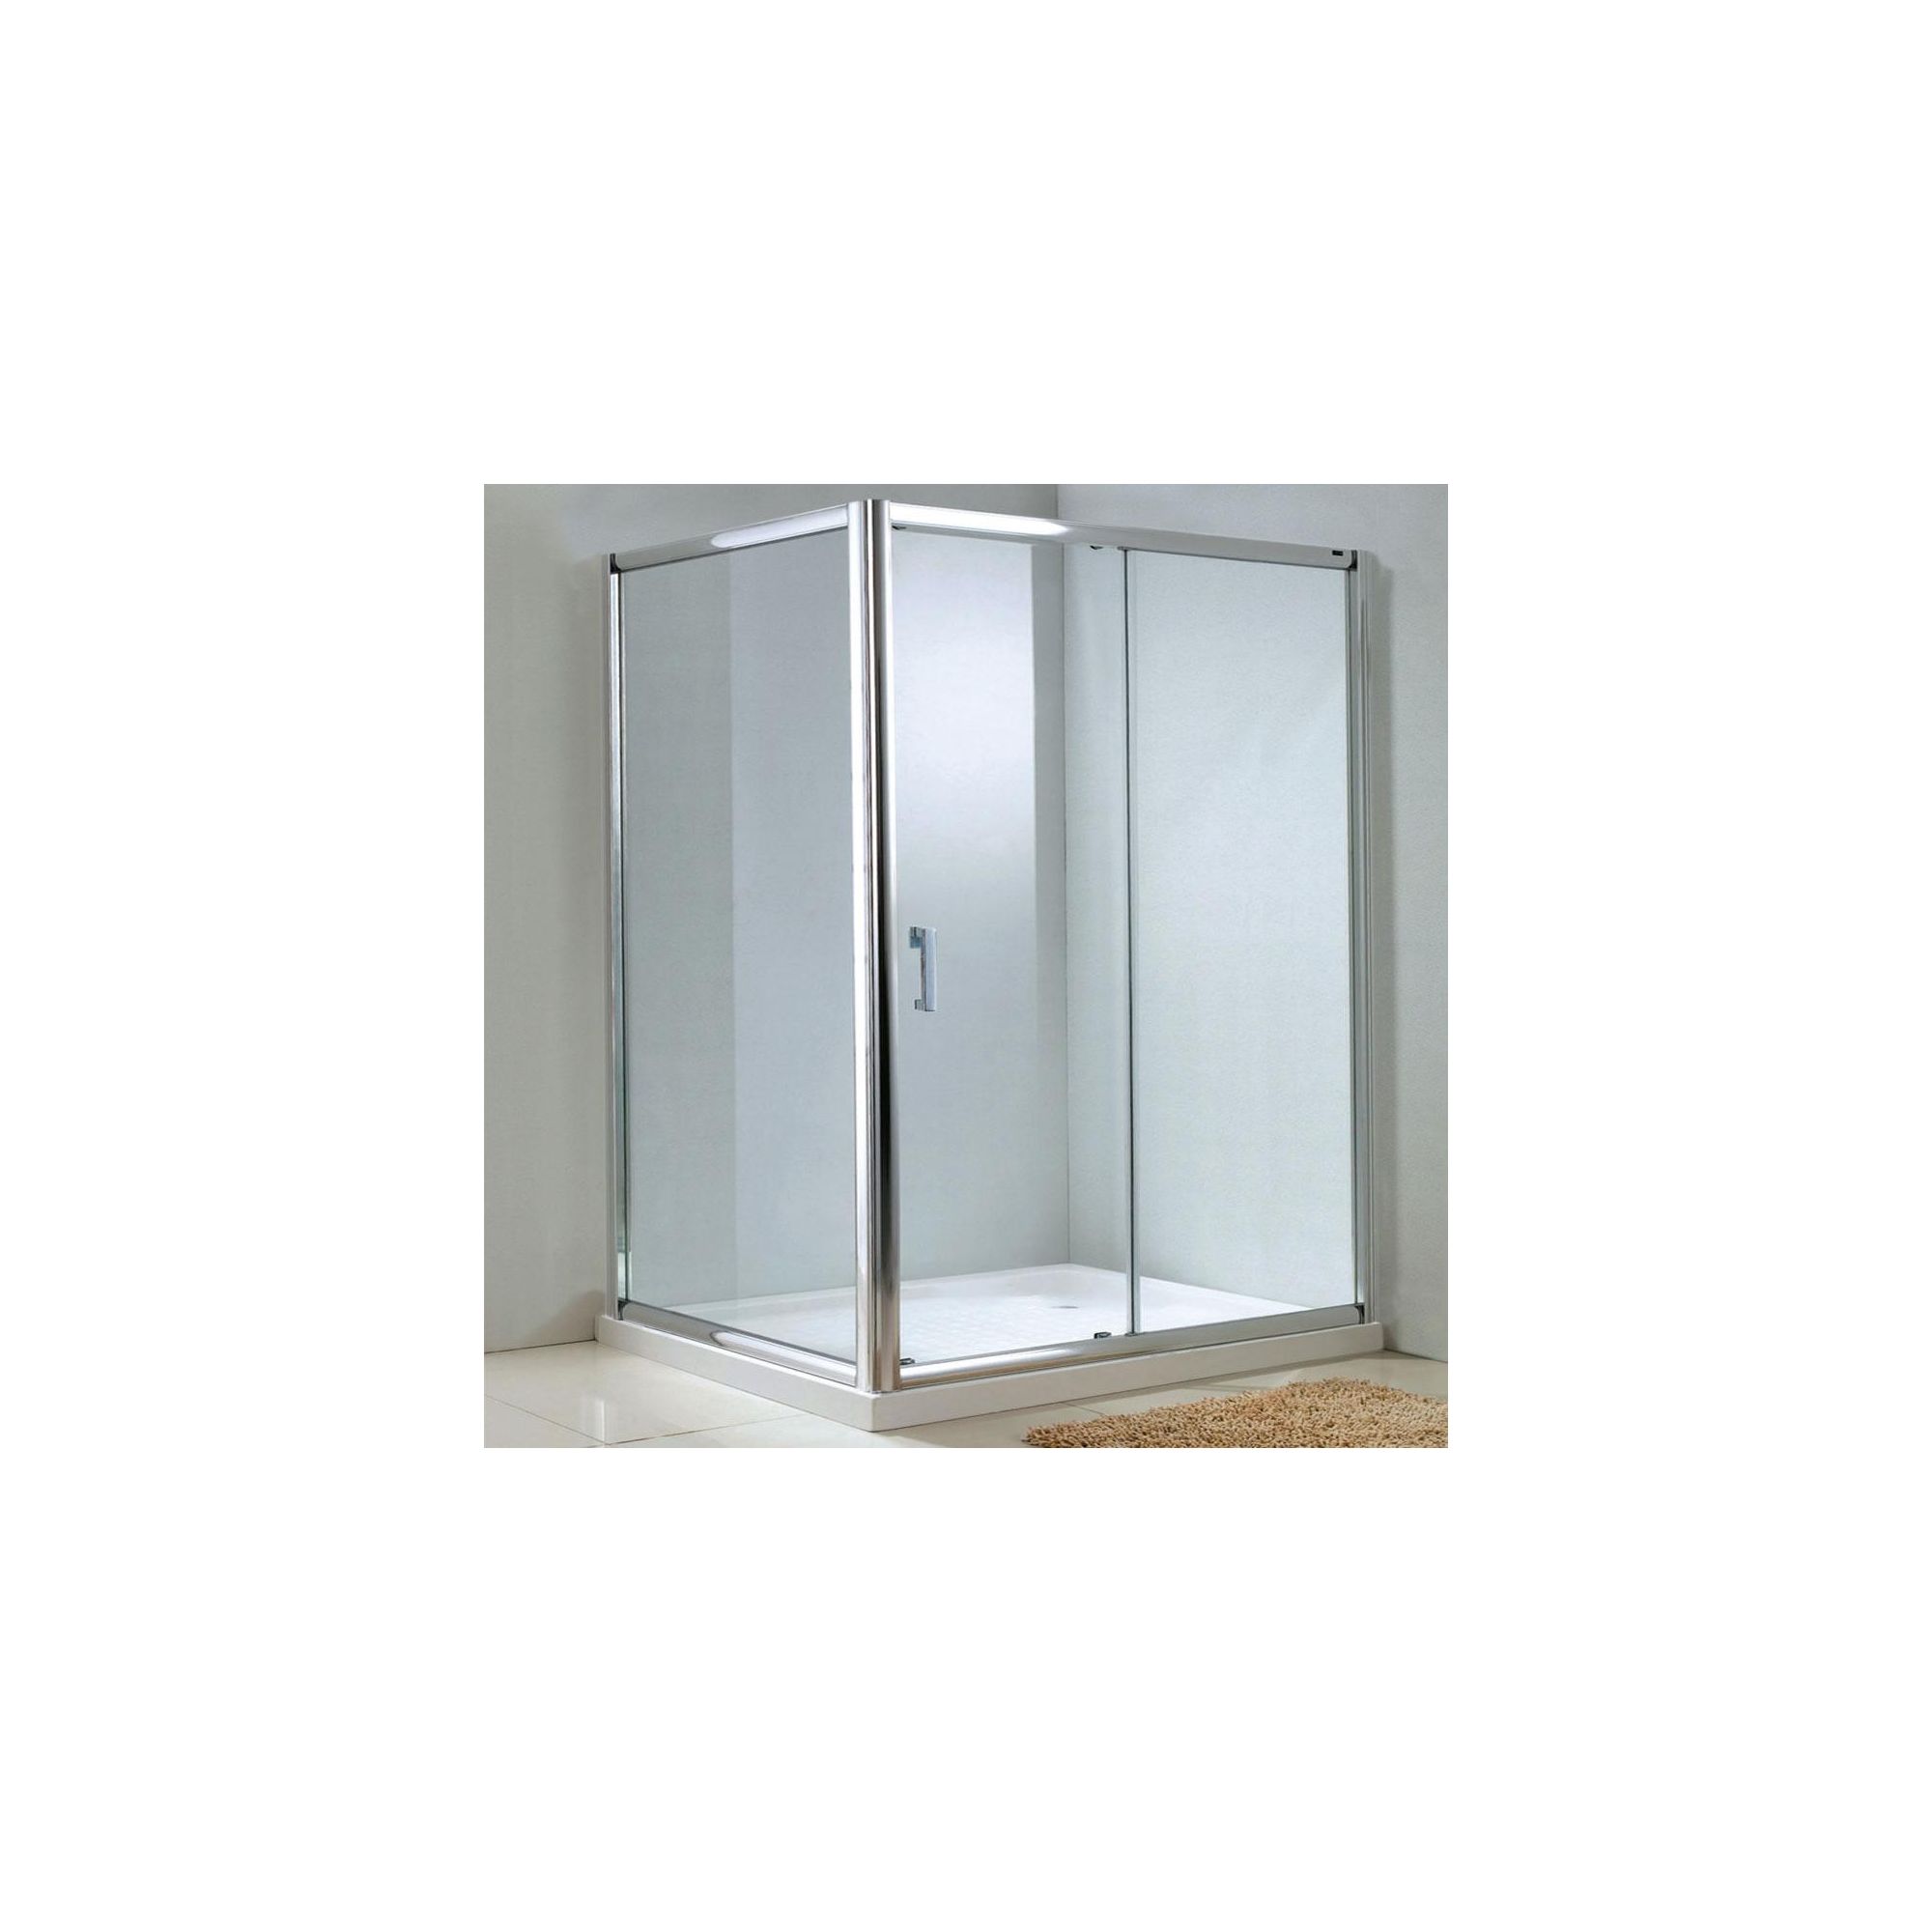 Duchy Style Single Sliding Door Shower Enclosure, 1000mm x 760mm, 6mm Glass, Low Profile Tray at Tesco Direct